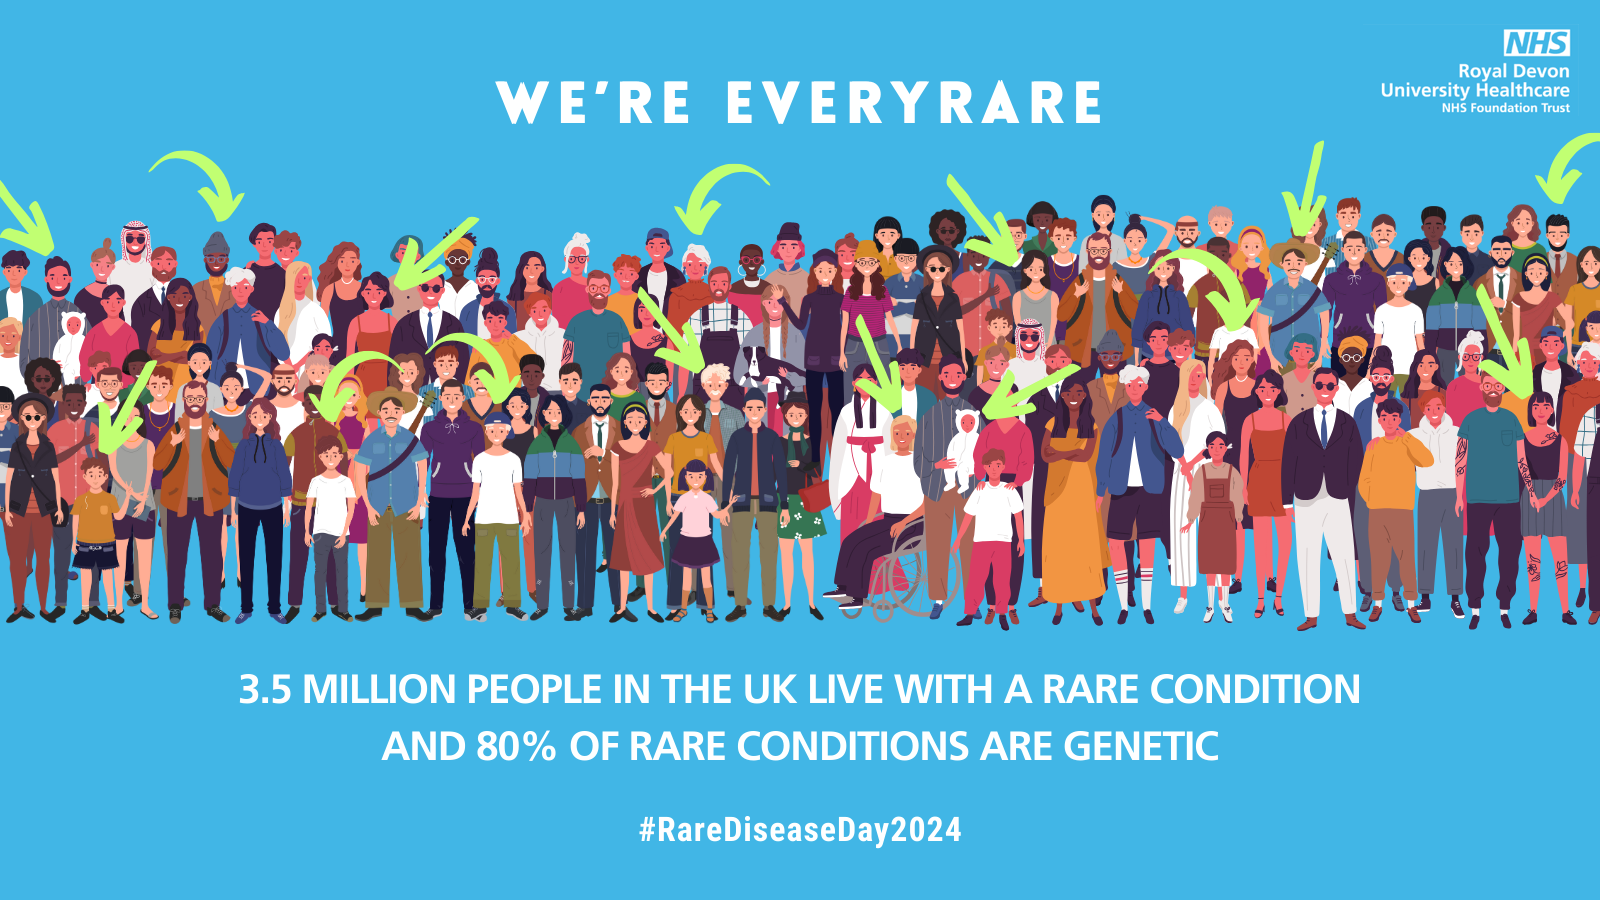 We're everyrare. 3.5 million people in the UK live with a rare condition and 80% of rare conditions are genetic. #RareDiseaseDay2024